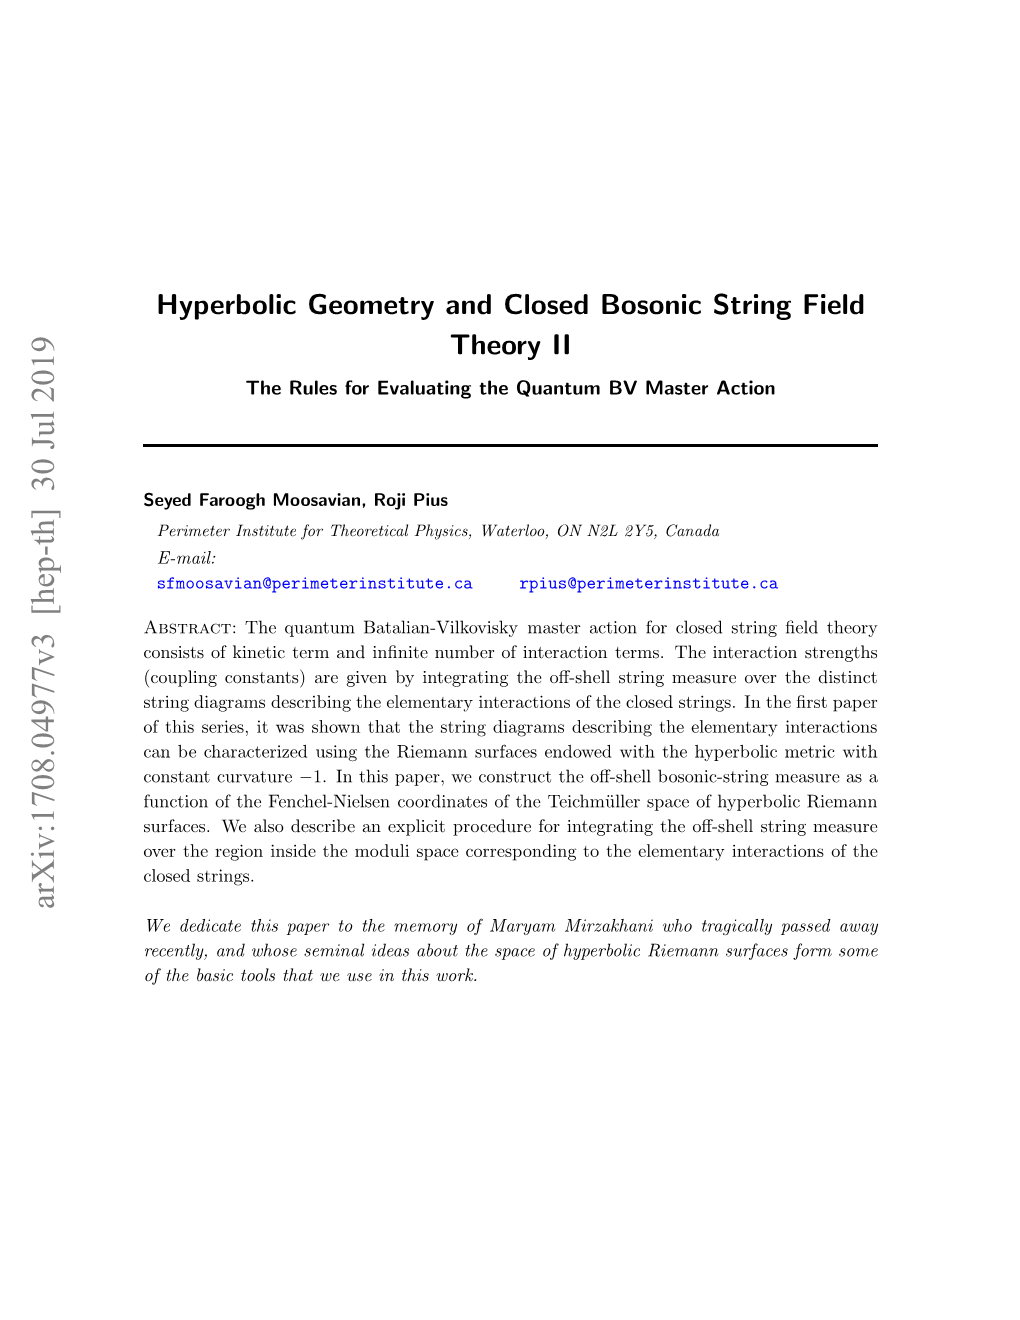 Hyperbolic Geometry and Closed Bosonic String Field Theory II: The